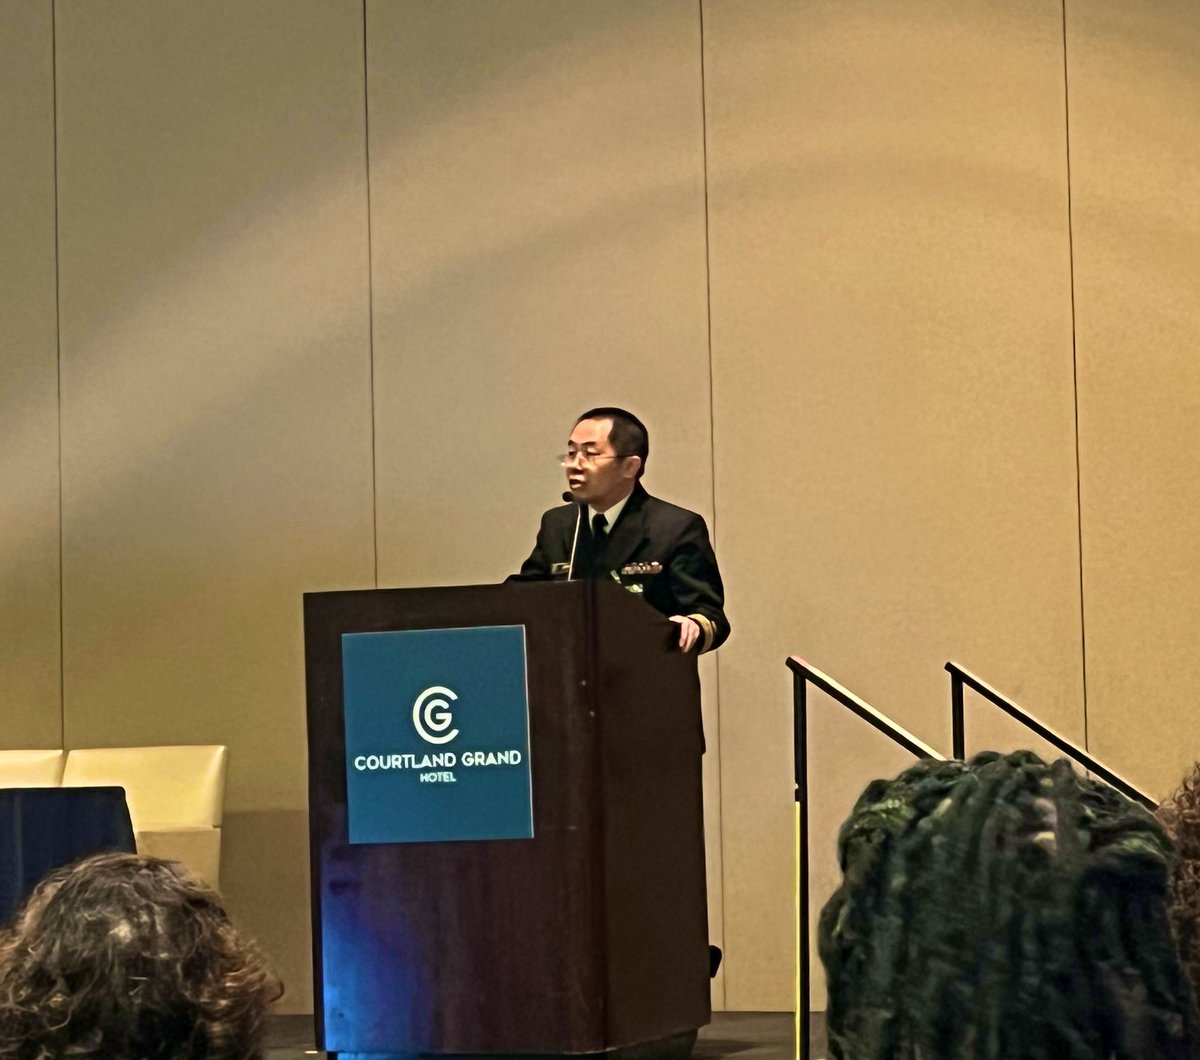 The #NIHCEAL’s Annual Meeting on “The Future of CEAL: Transforming Health Through Community-engaged Science” is advancing the importance of communities & the science of engagement! Dr. Xinzhi Zhang @NIH: “This is not a moment. This is a movement.”